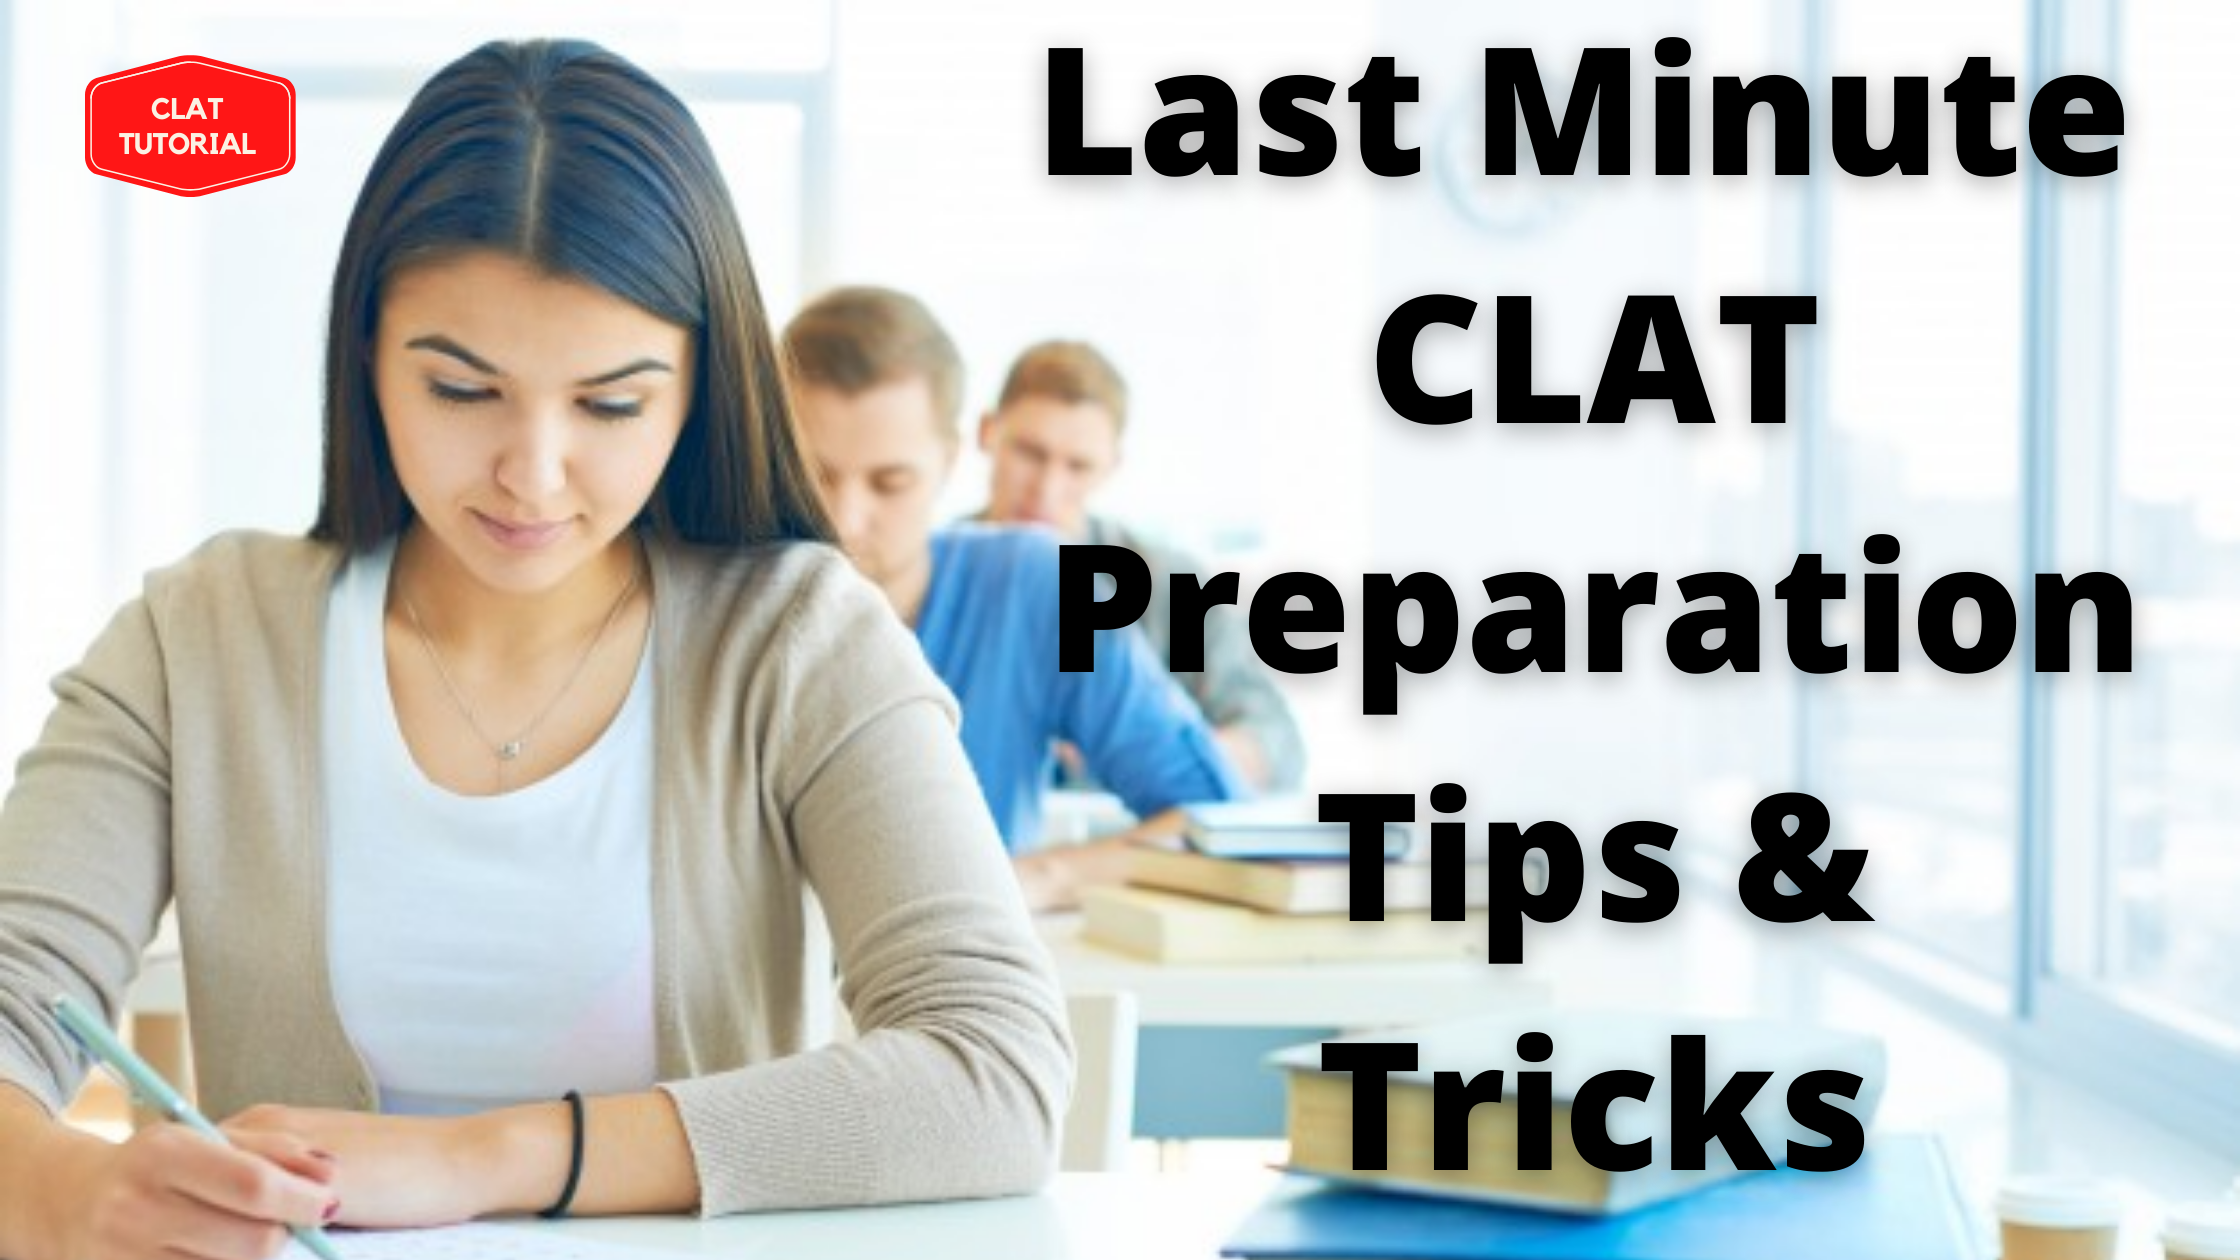 last-minute-preparation-tips-for-clat-2021-clat-tutorial